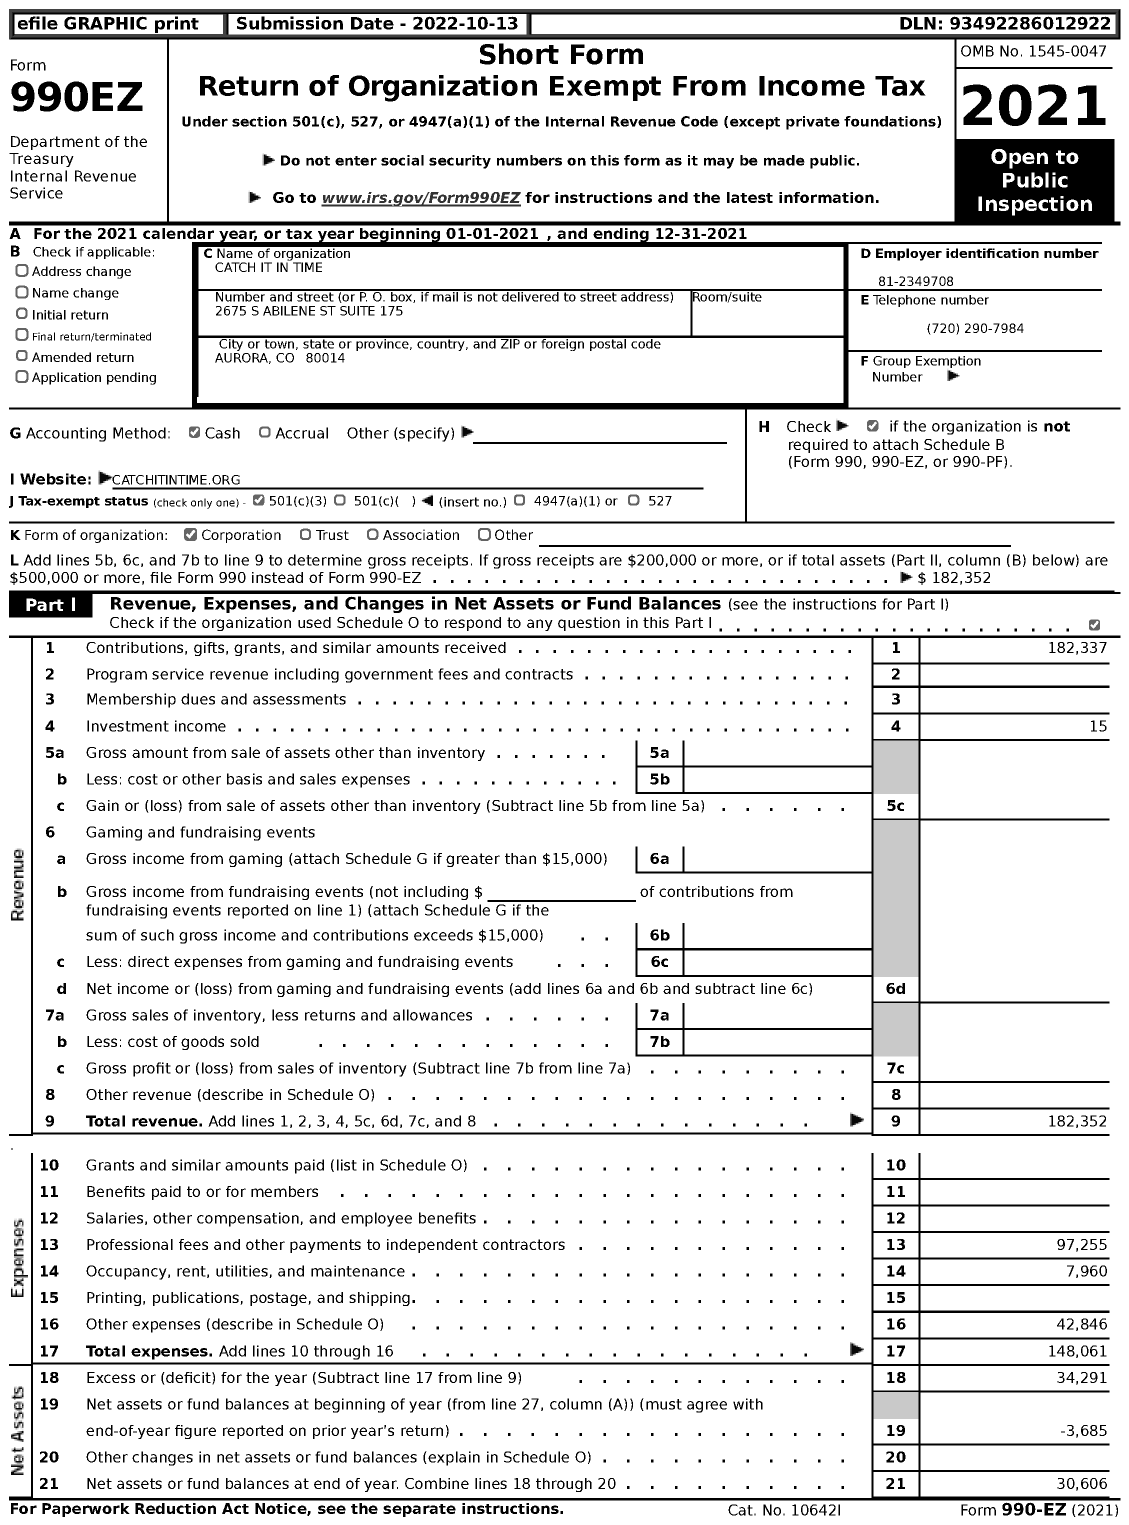 Image of first page of 2021 Form 990EZ for Catch It in Time